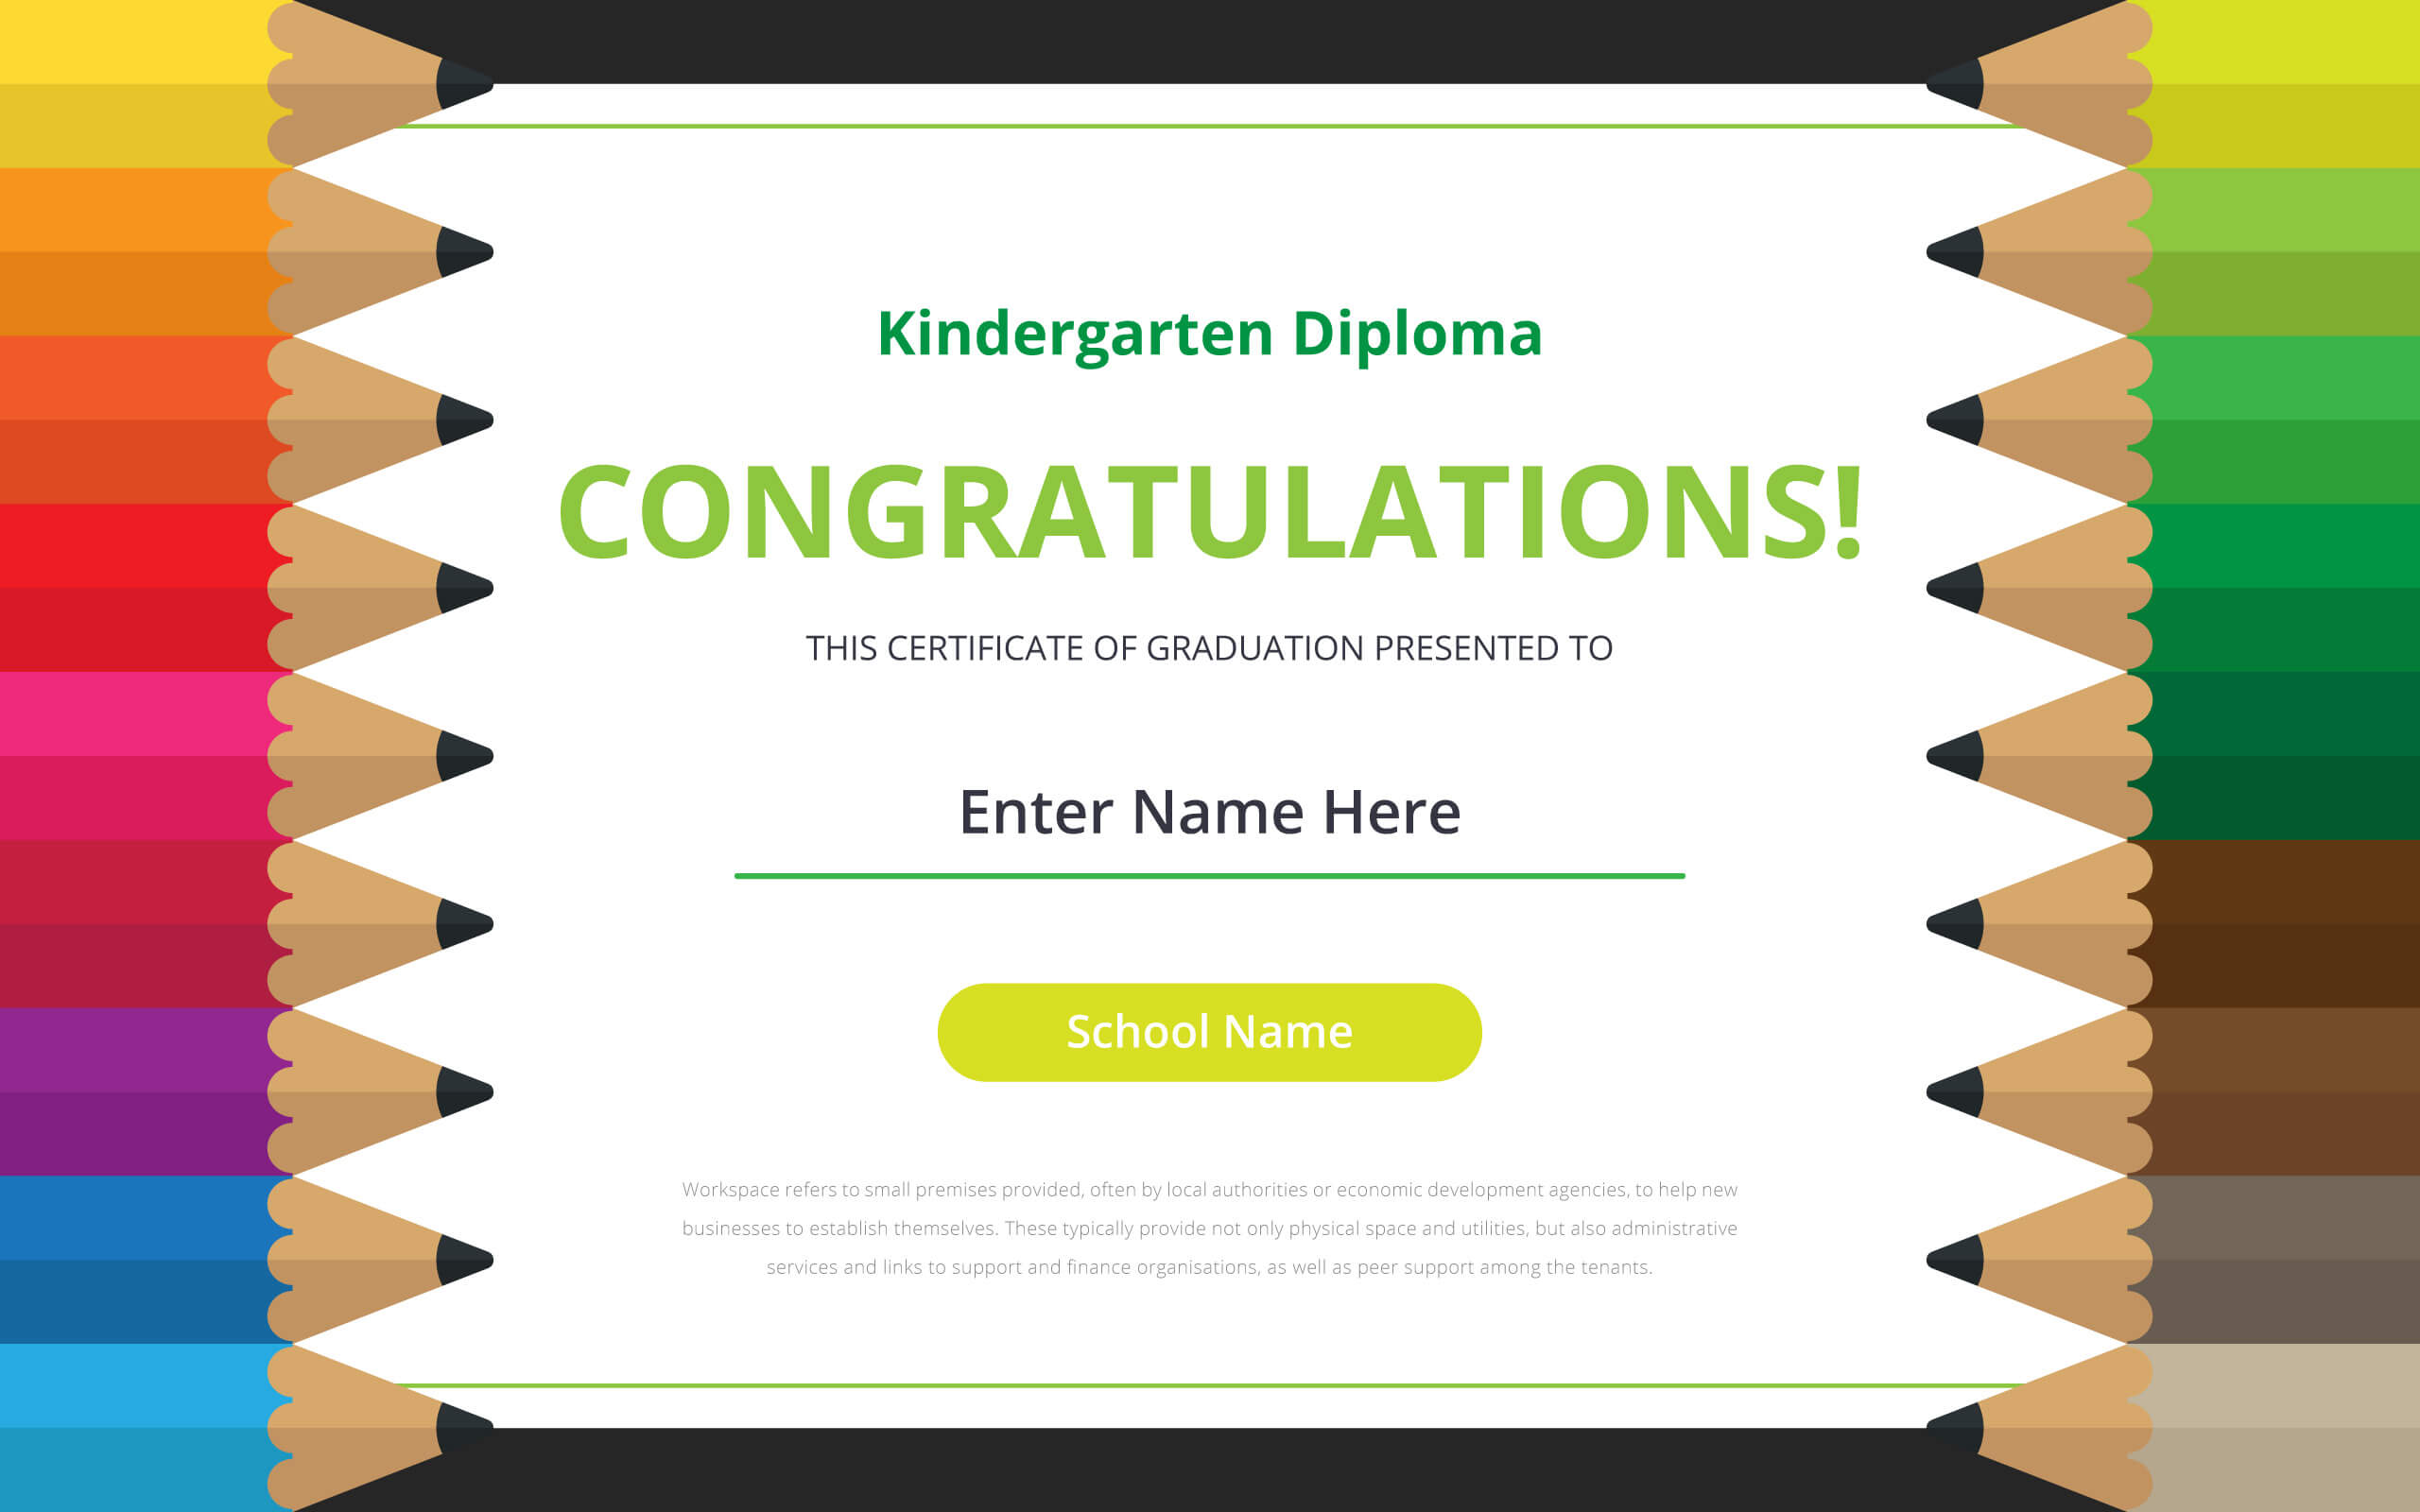 Kindergarten Diploma Certificate Template - Download Free Throughout Small Certificate Template